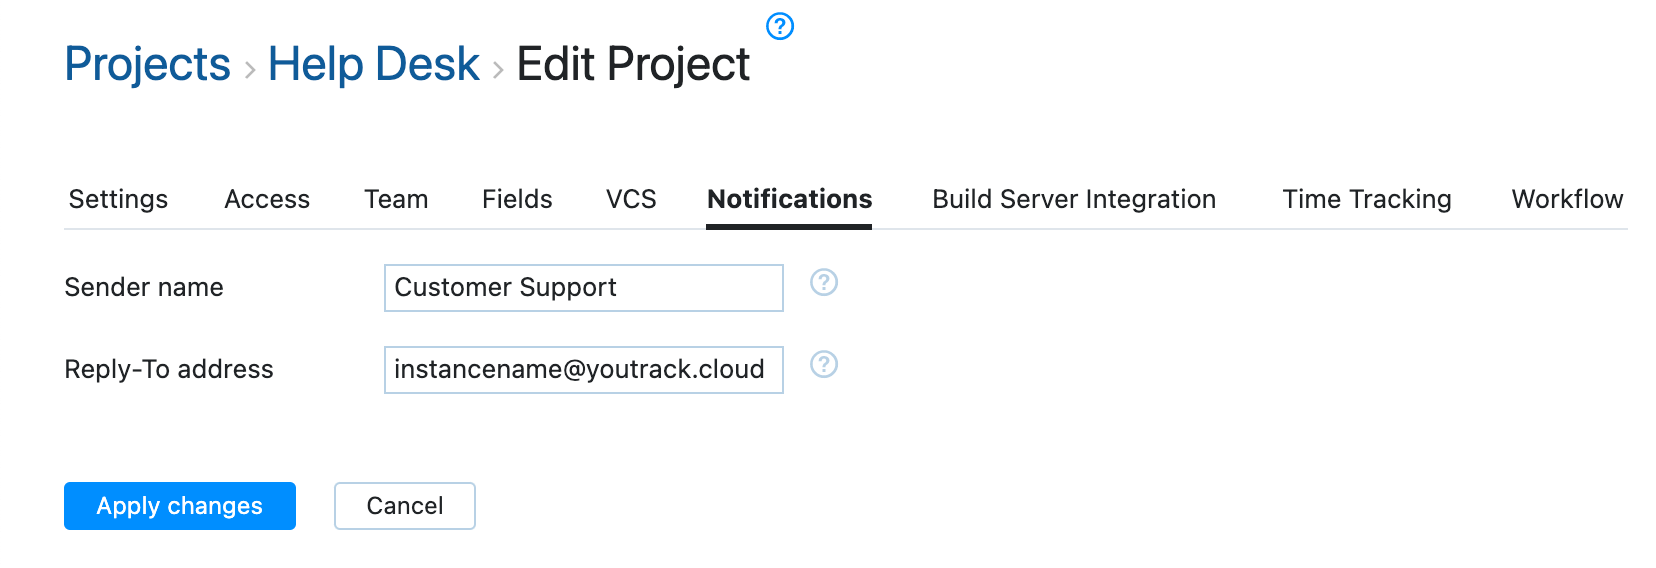 Project notifications settings for help desk.